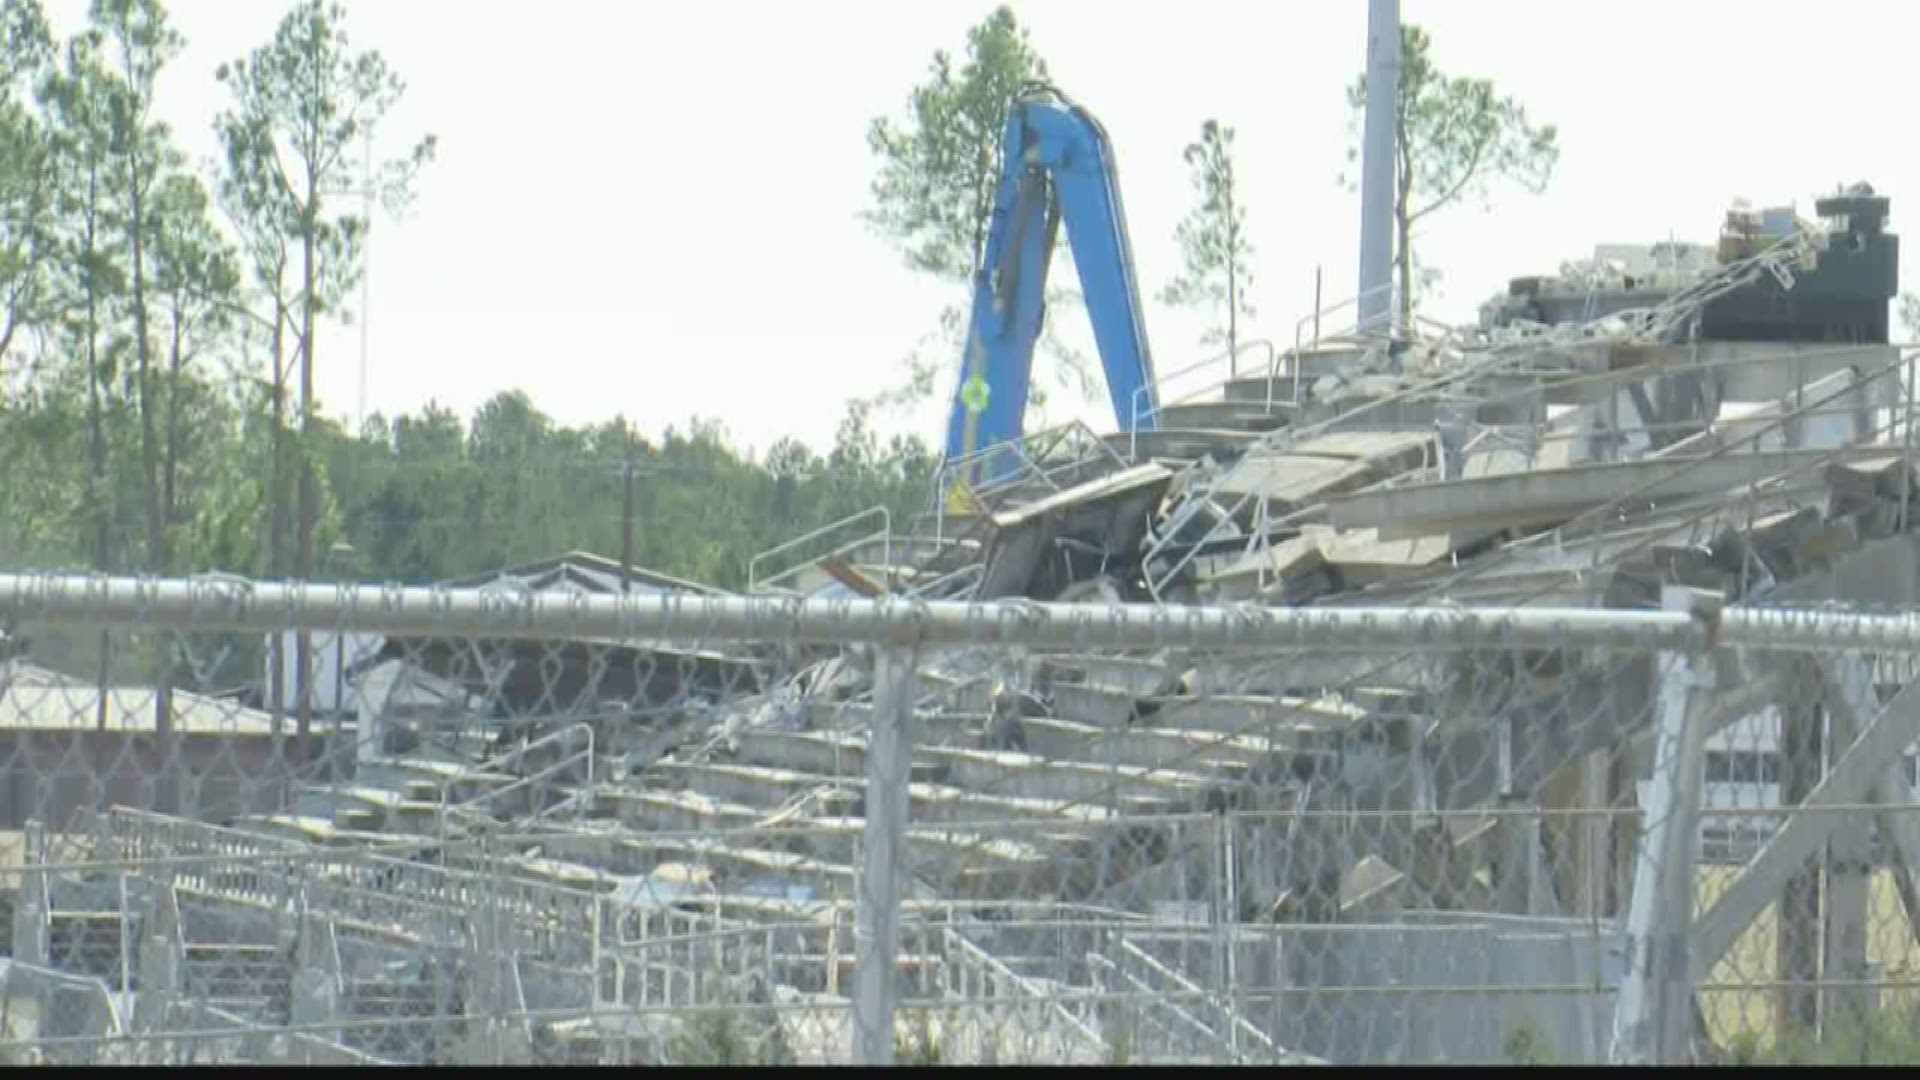 Crews have started to demolish part of North Central High School's football stadium after a tornado damaged it and parts of the school.